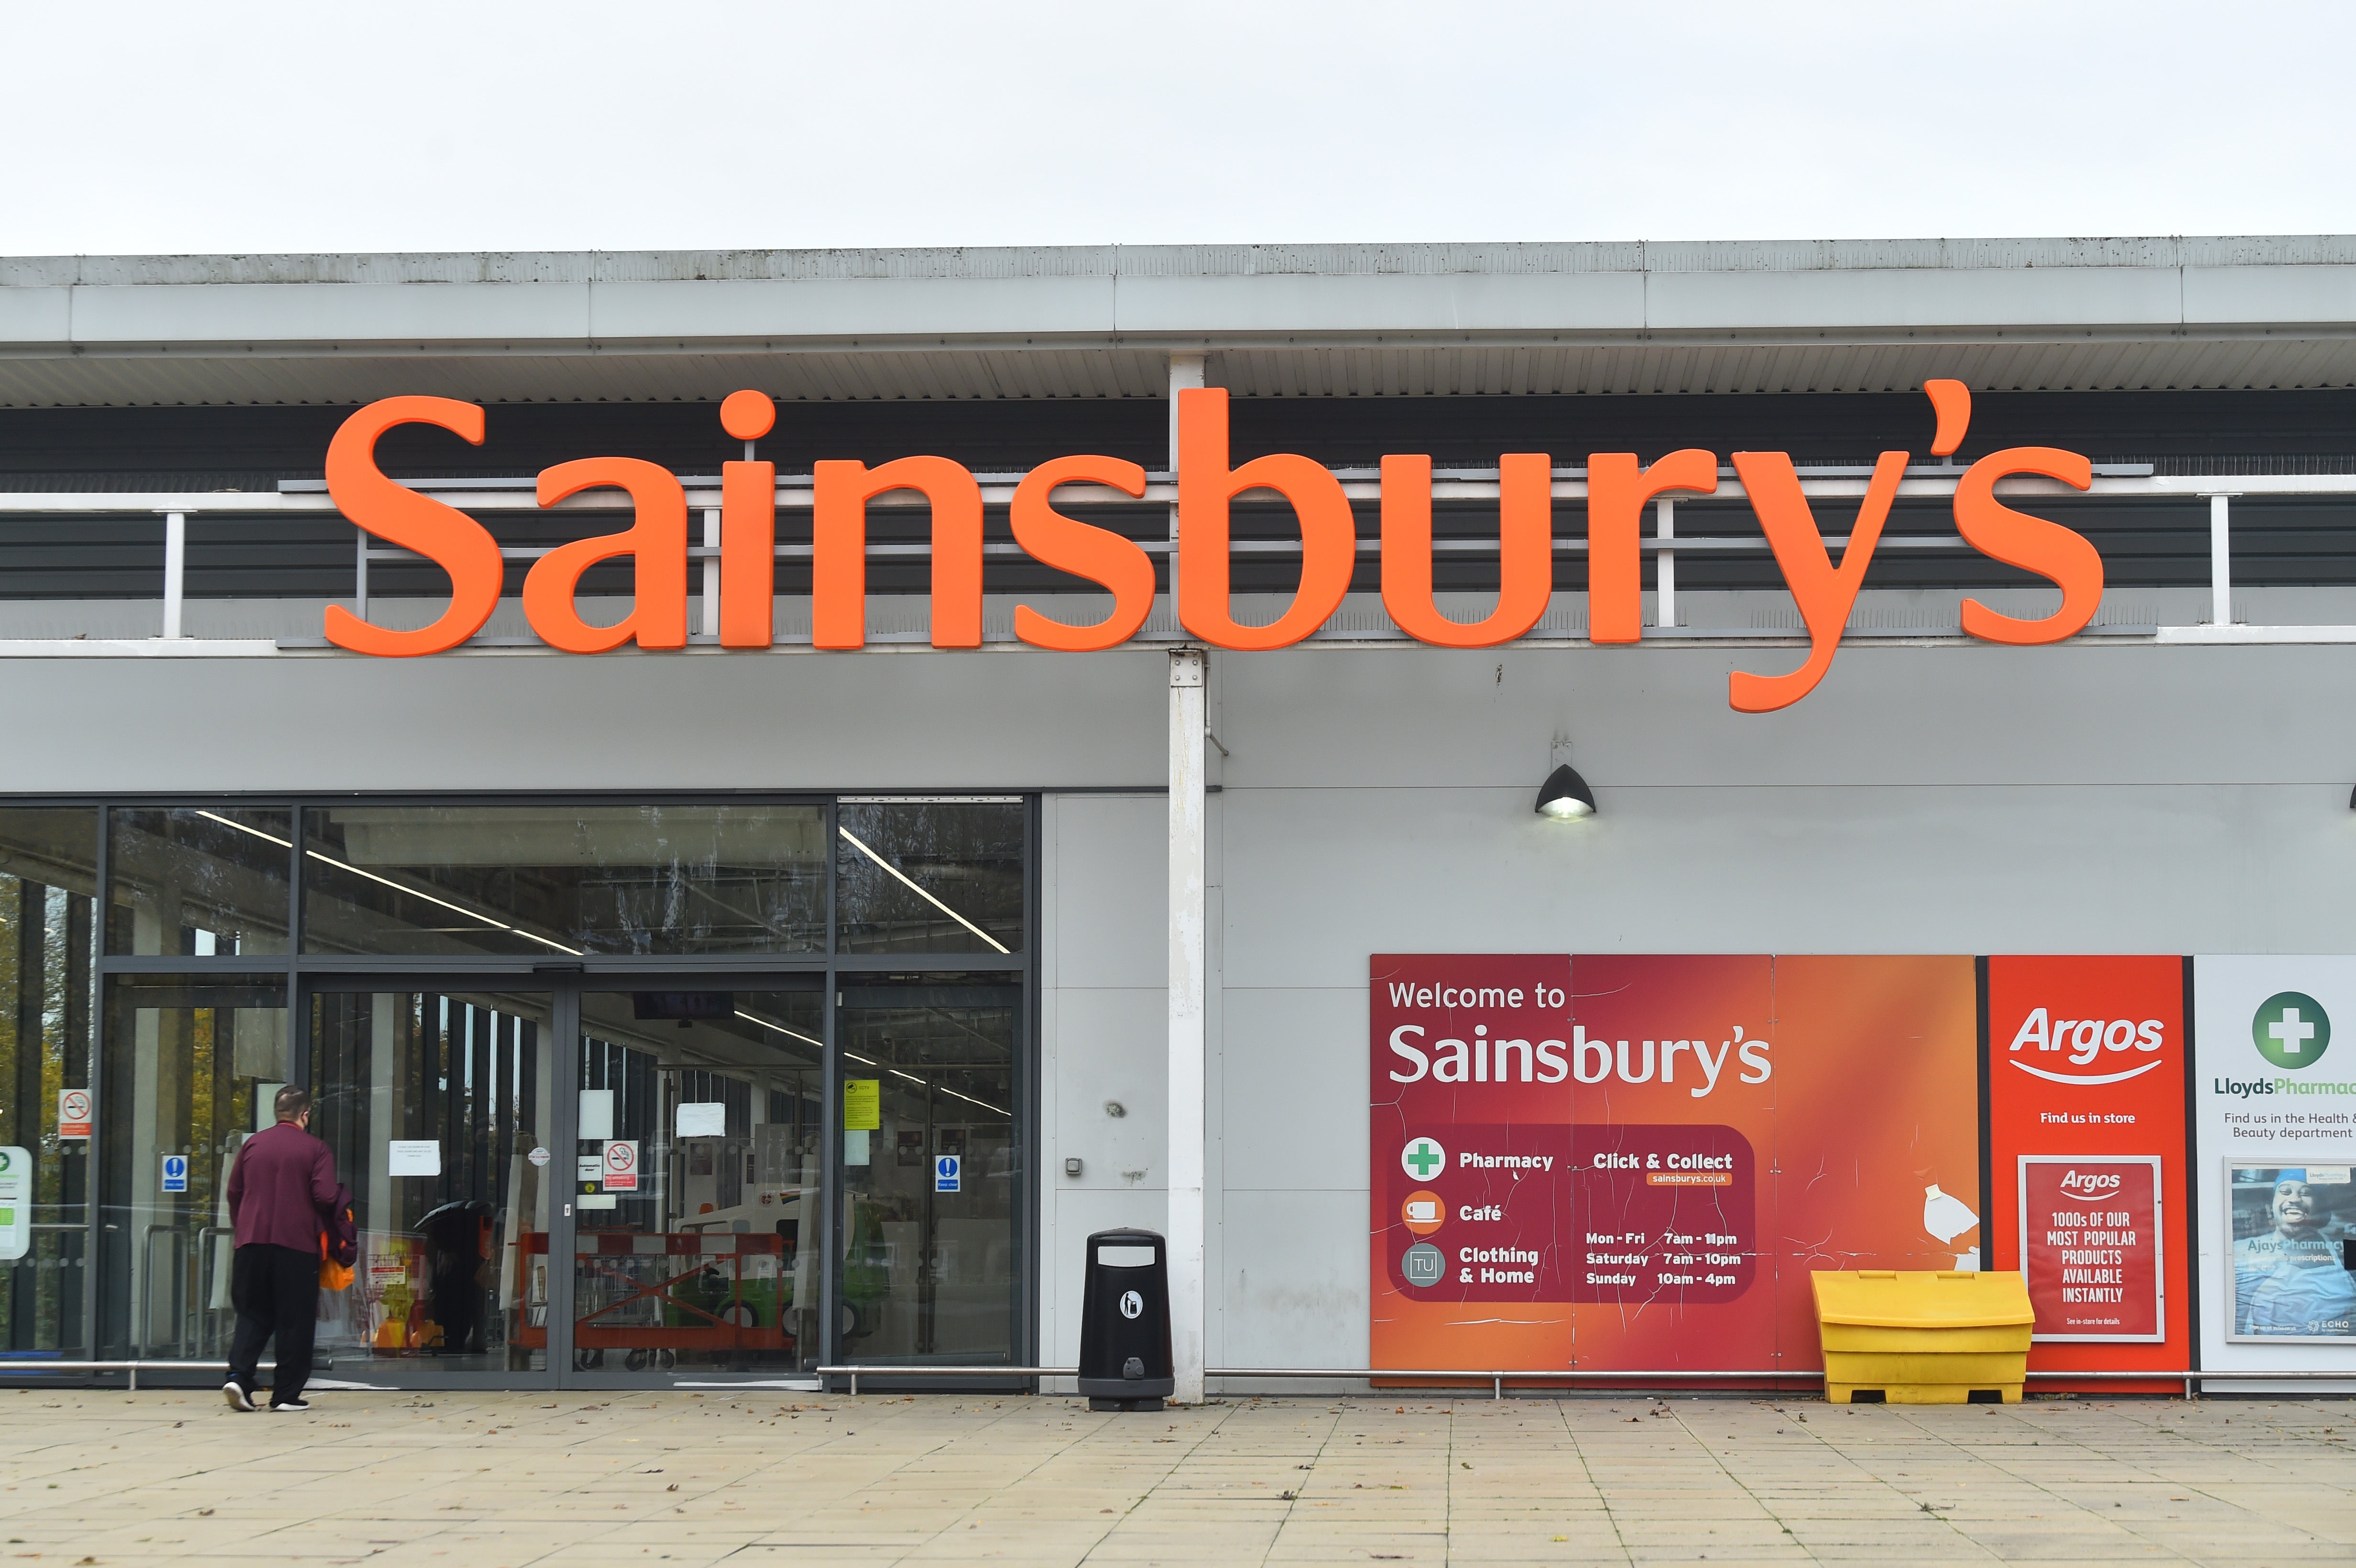 The collection action from supermarkets comes in response to racism comments made online about Sainsbury’s Christmas advert this year.